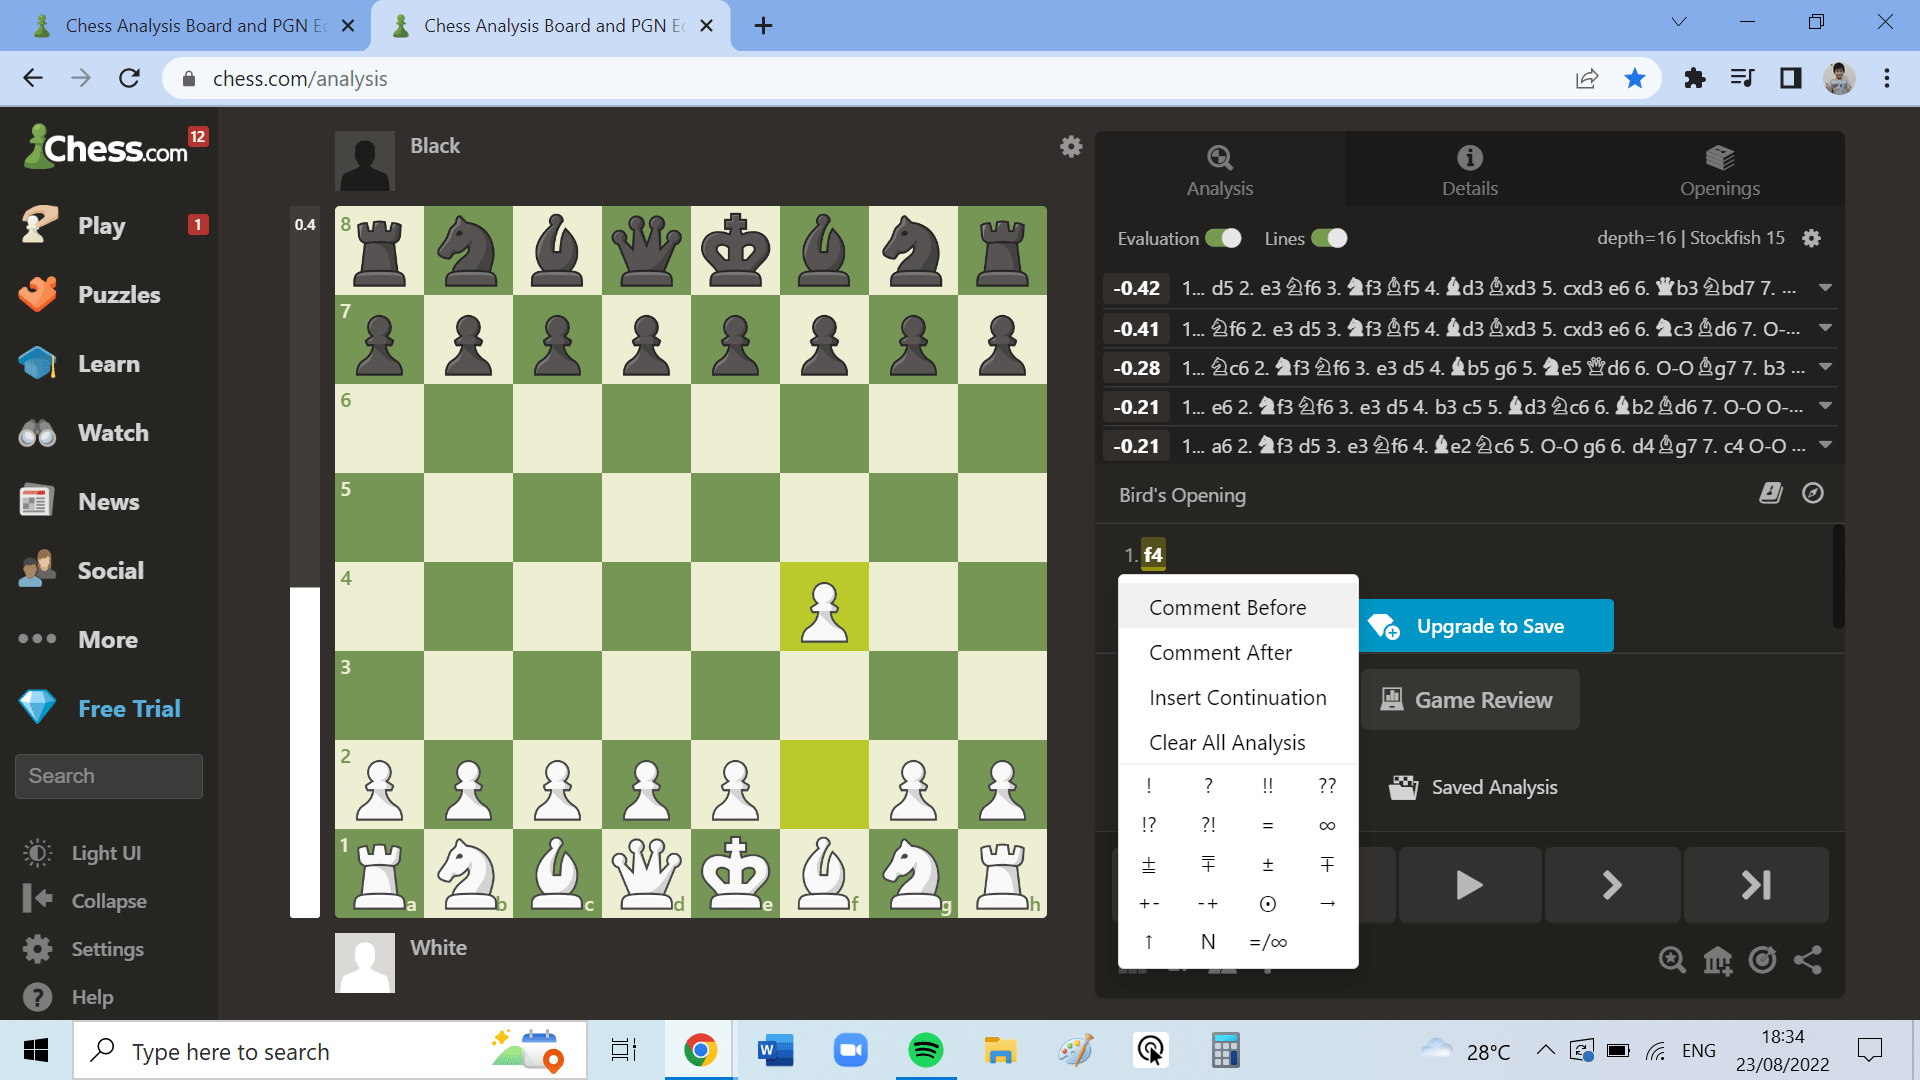 User not allowed access to analysis - Chess Forums 